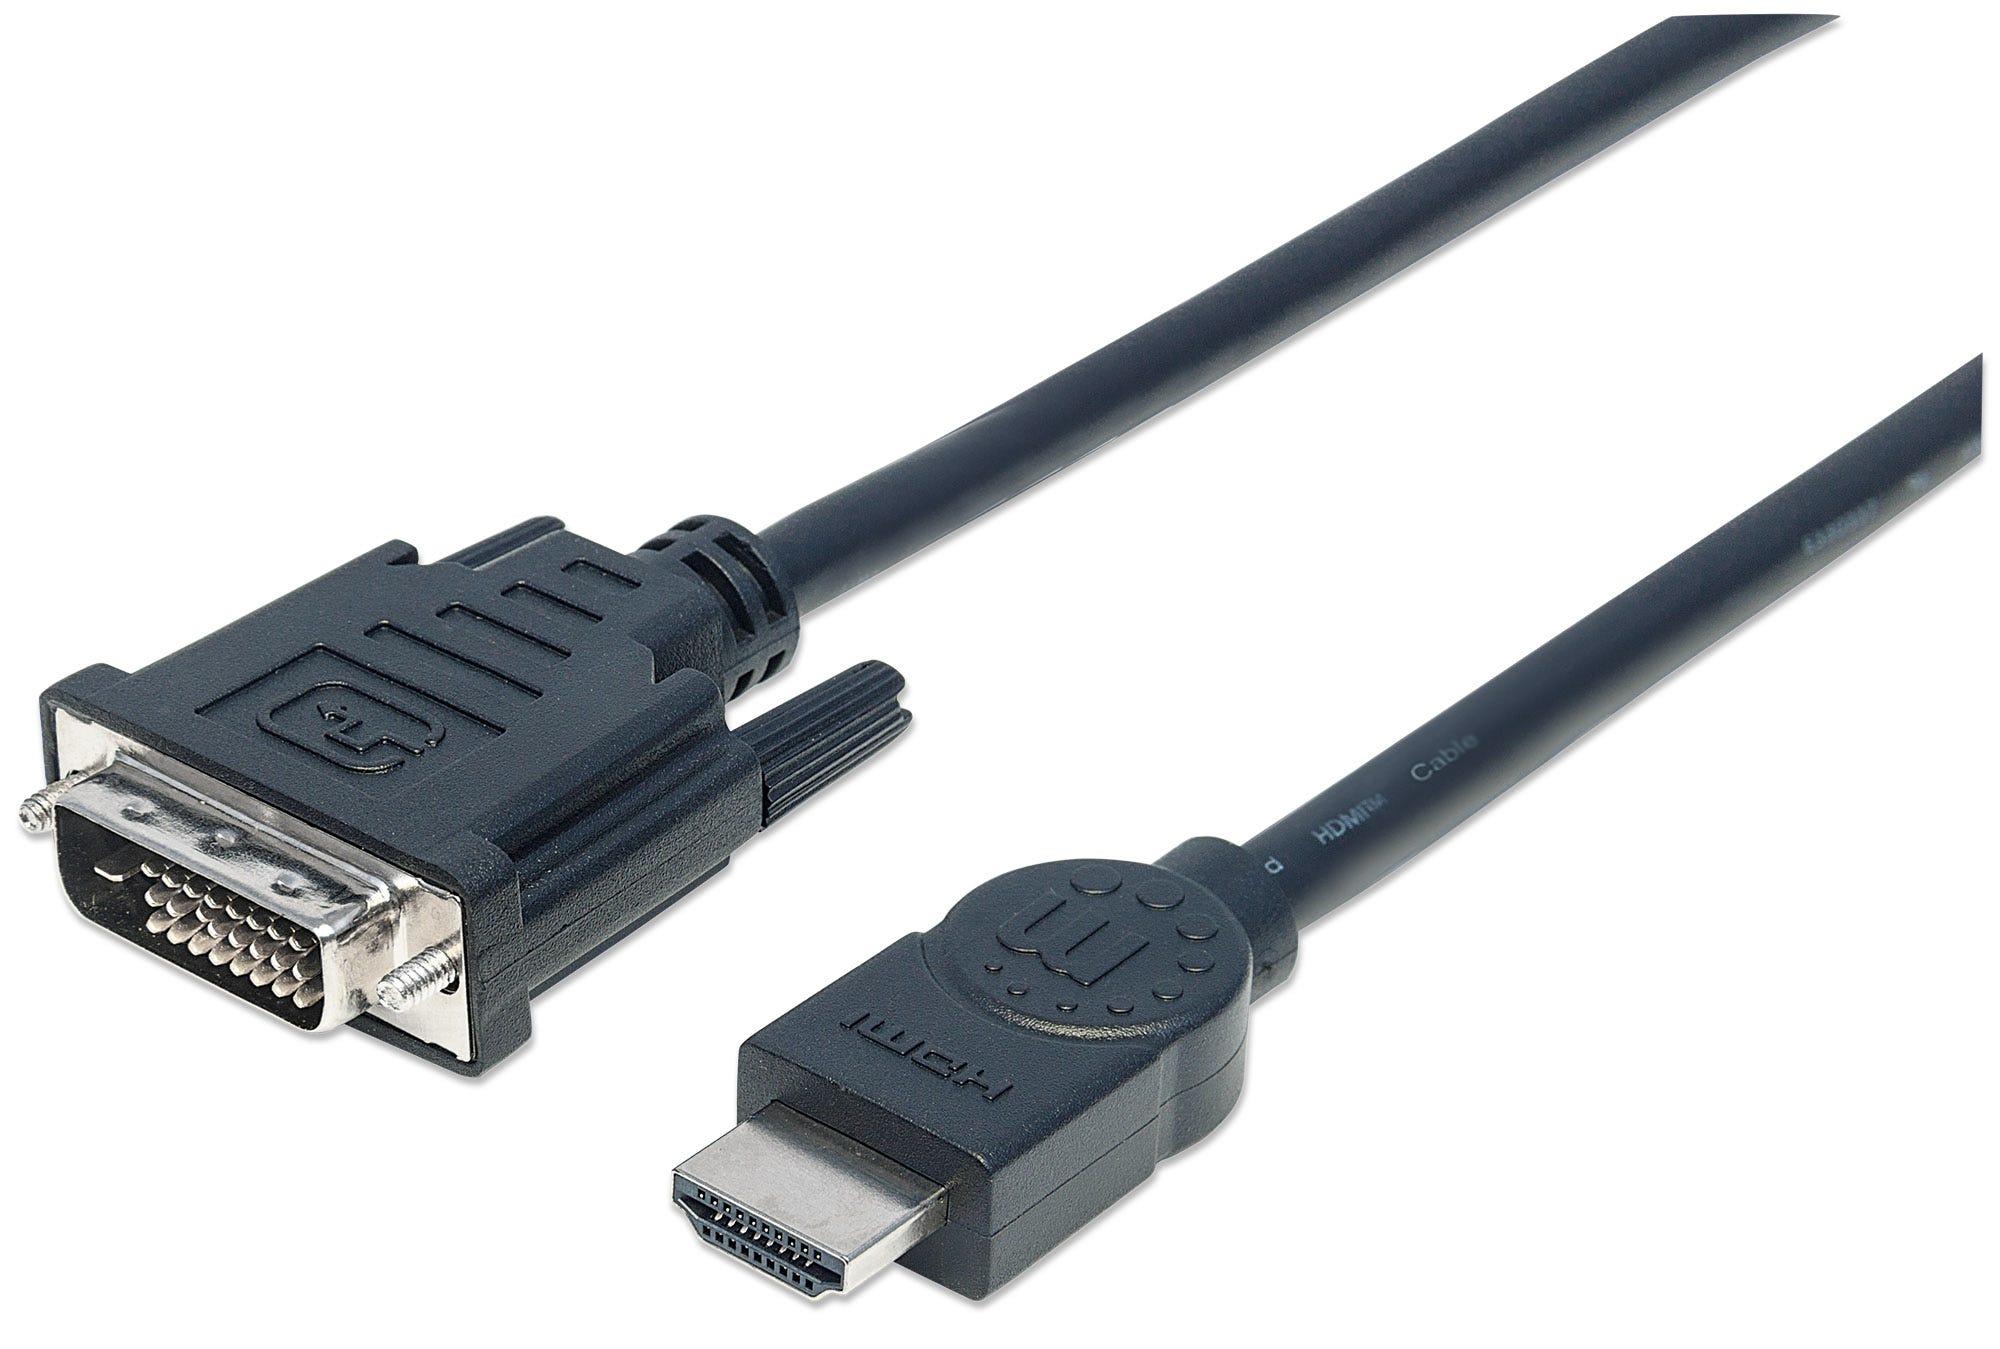 Photos - Cable (video, audio, USB) MANHATTAN HDMI to DVI-D 24+1 Cable, 3m, Male to Male, Black, Equivalen 372 